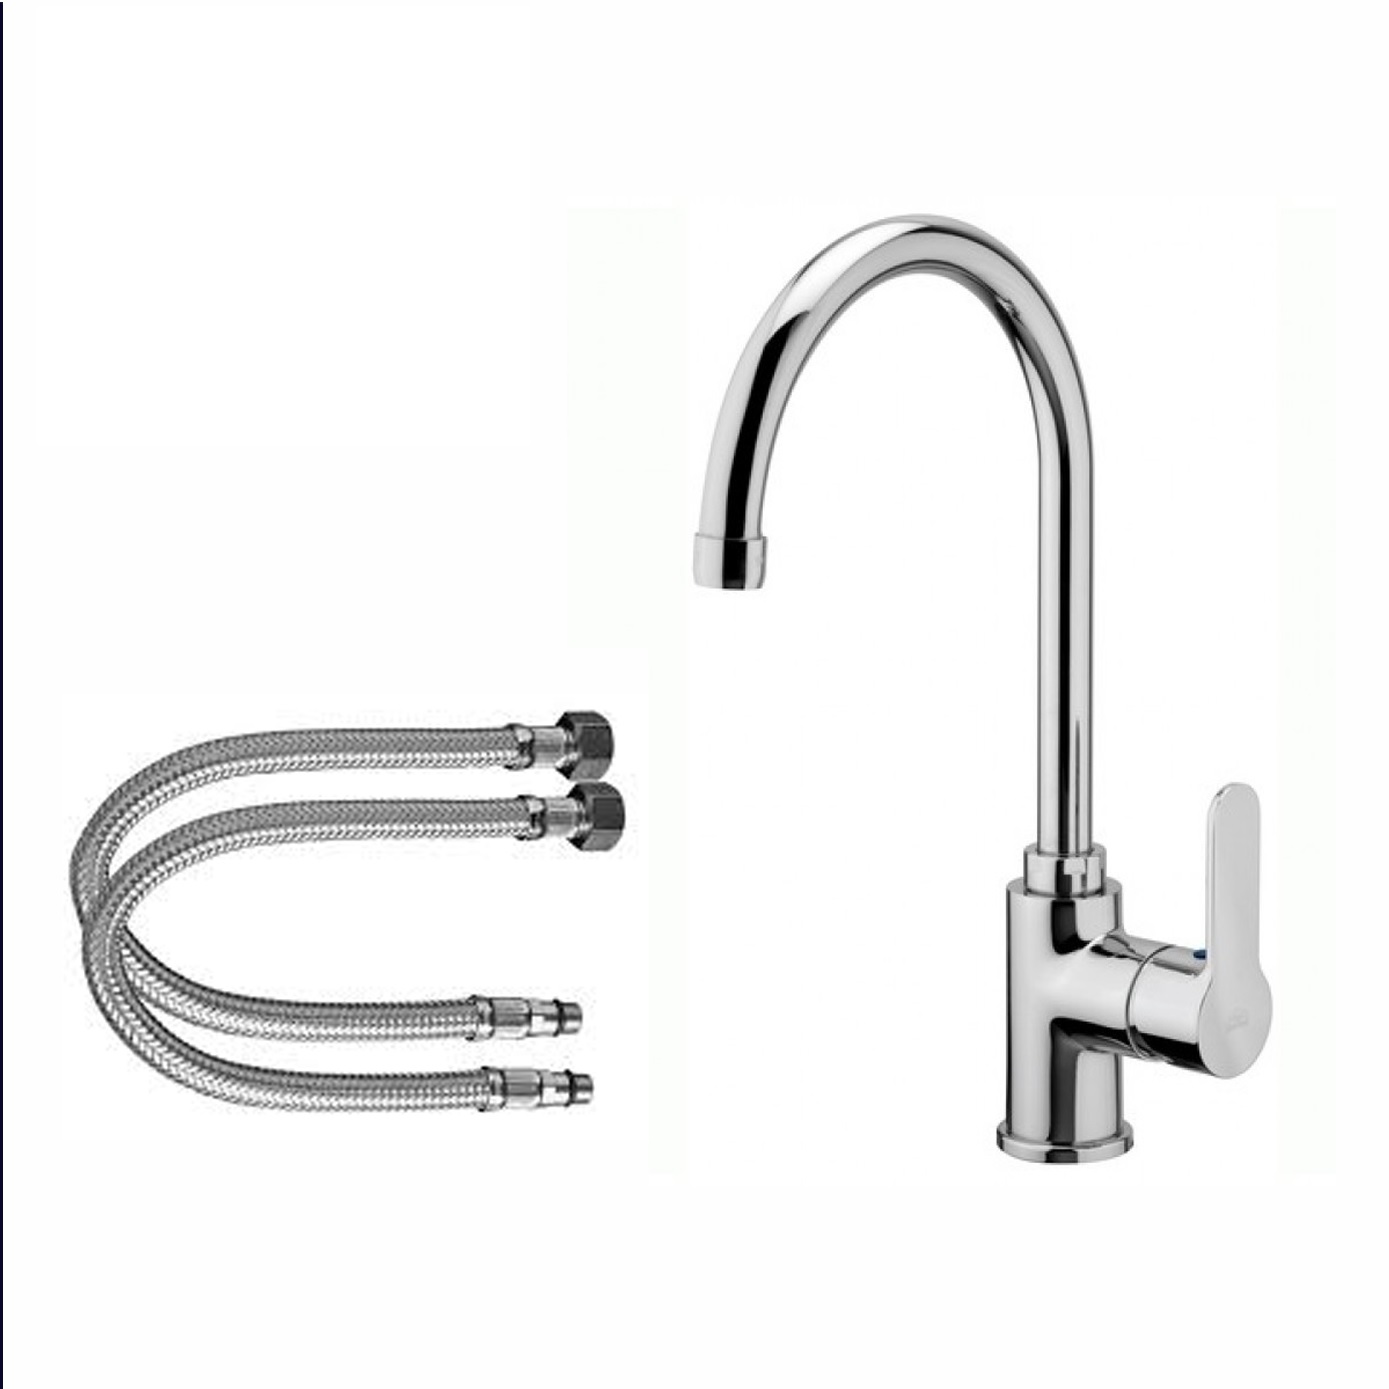 Chrome-mixer-faucet-for-kitchen-high-neck-RB250-2_1542726288_617